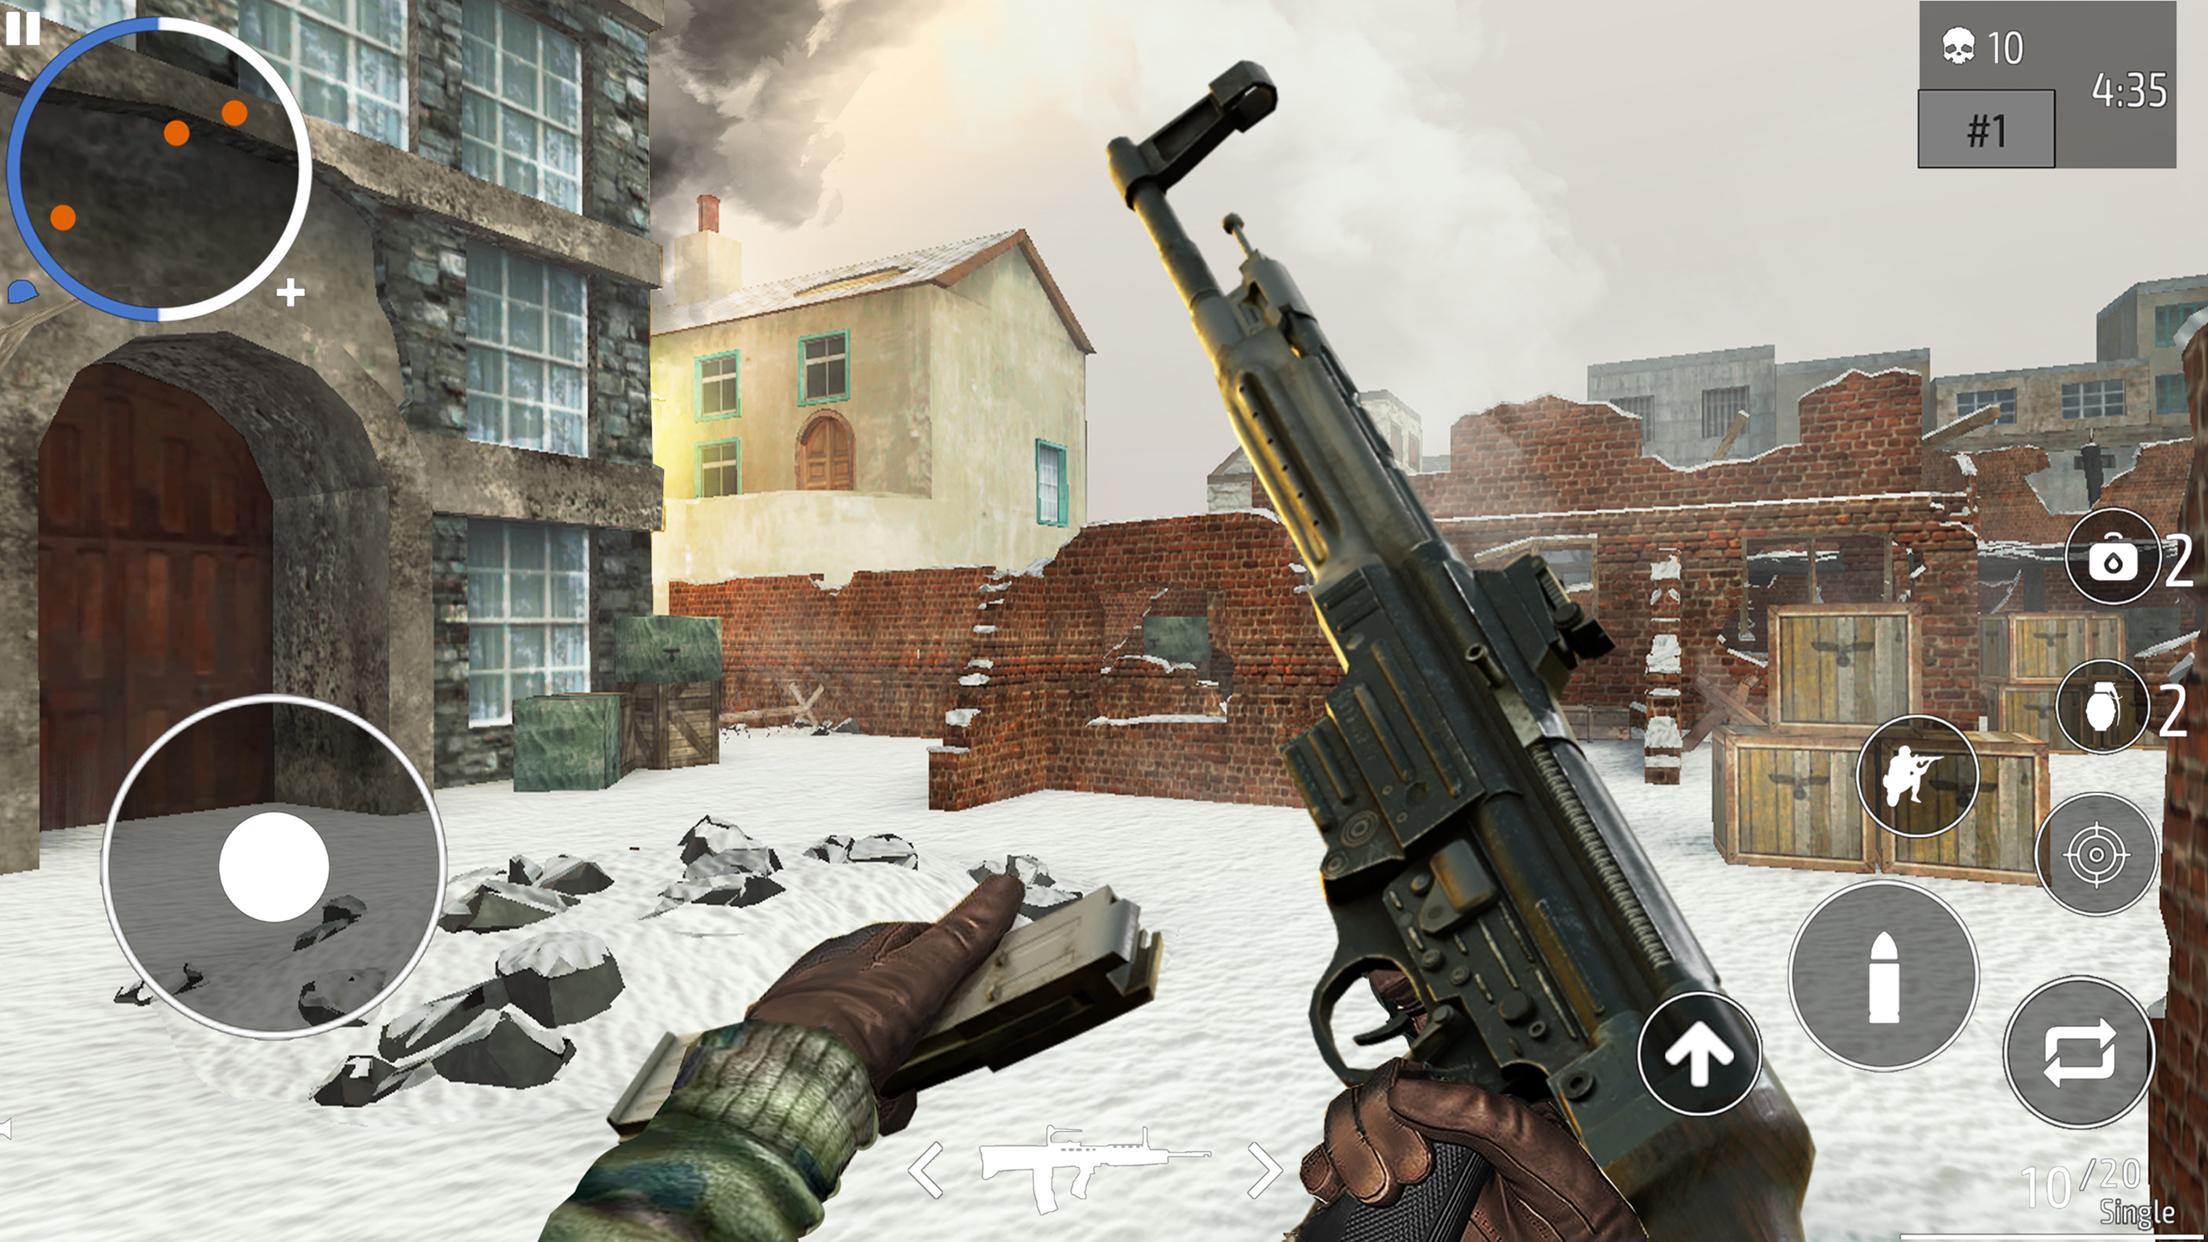 MAD Battle Royale, shooter Game for Android - Download